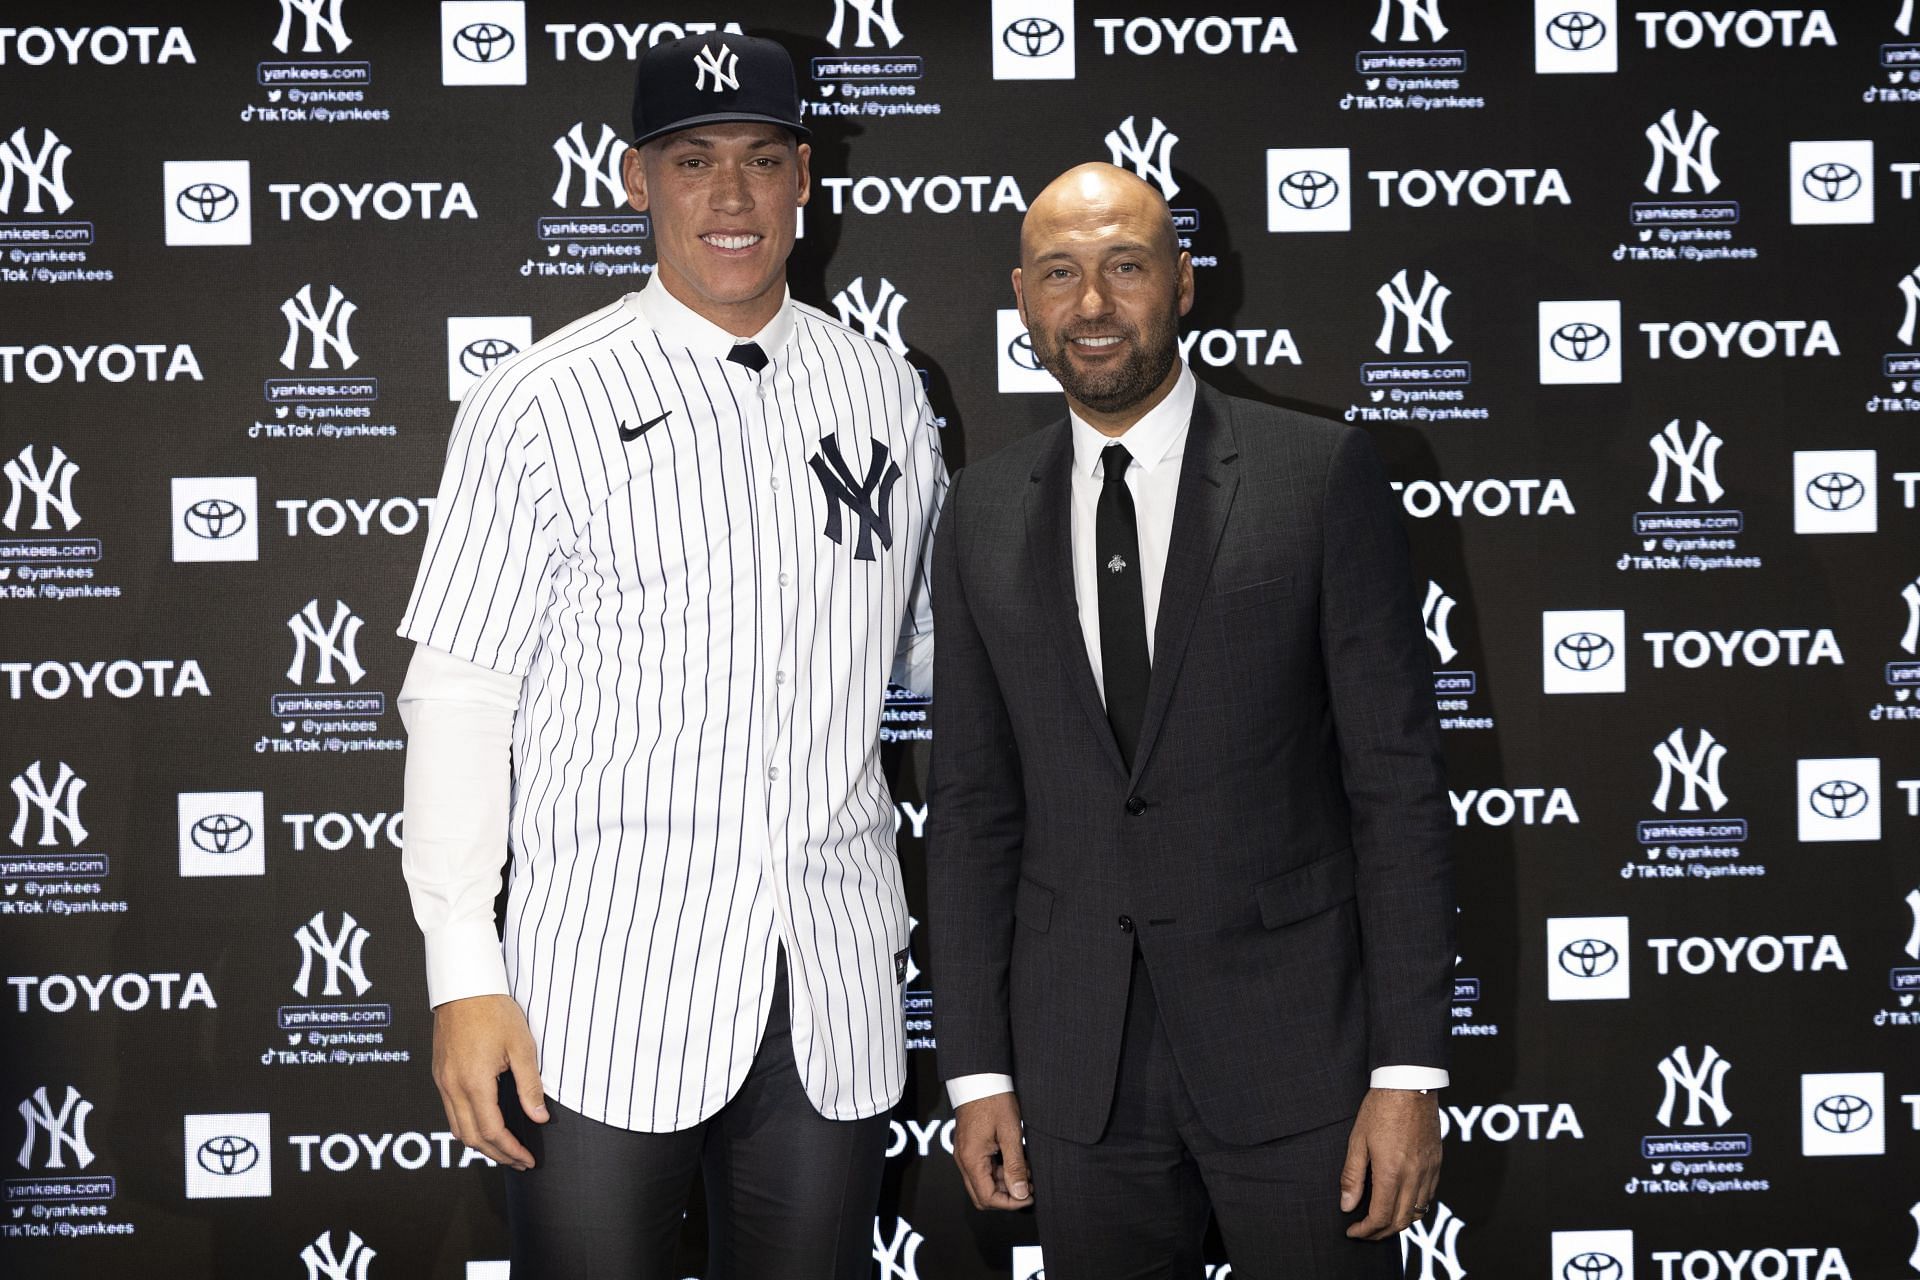 Aaron with Derek Jeter at new York Yankees Press Conference